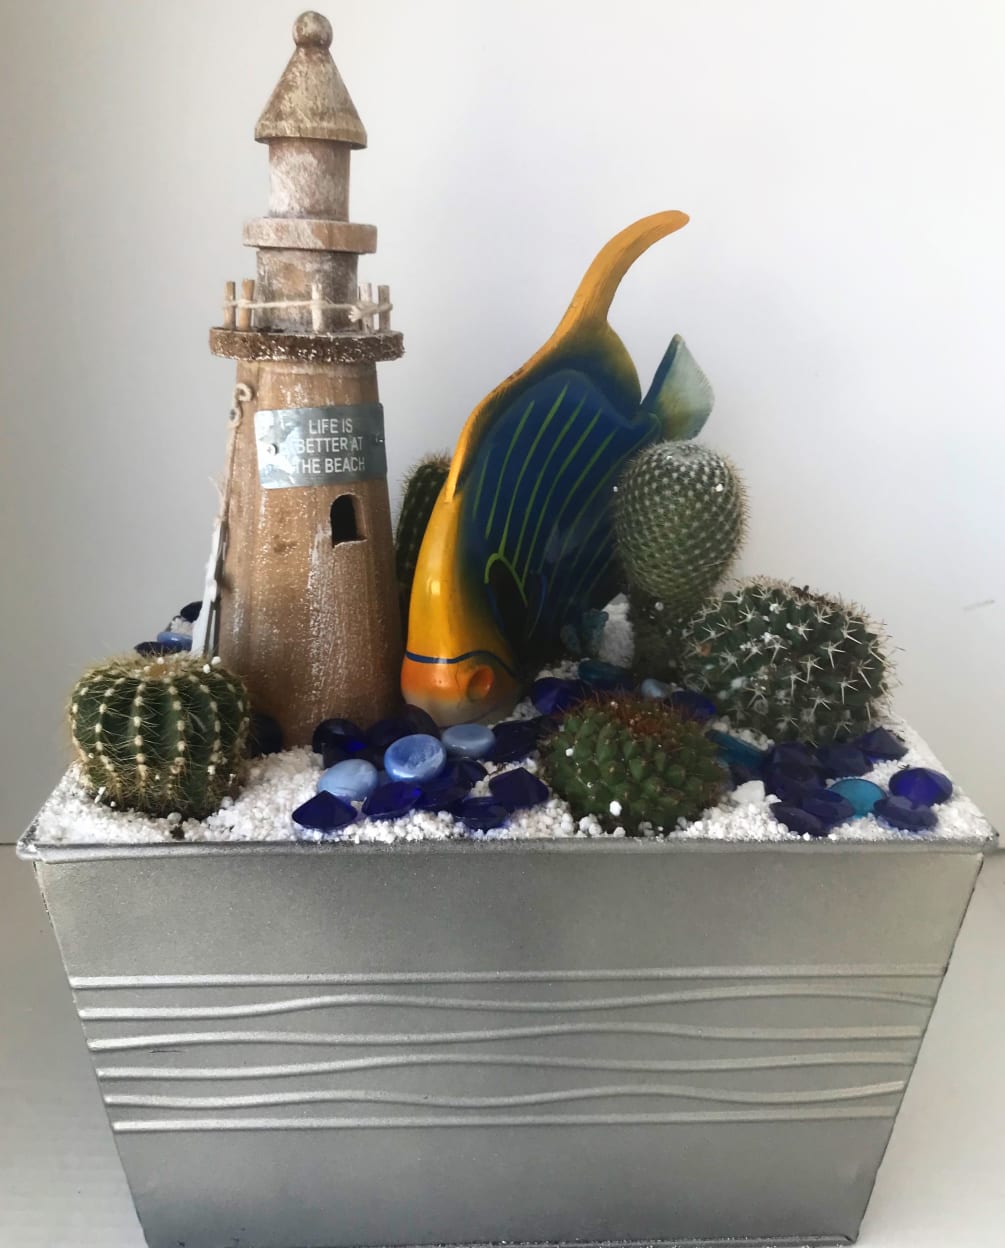 A nautical kind of cactus garden. Definatly not of the ordinary, but